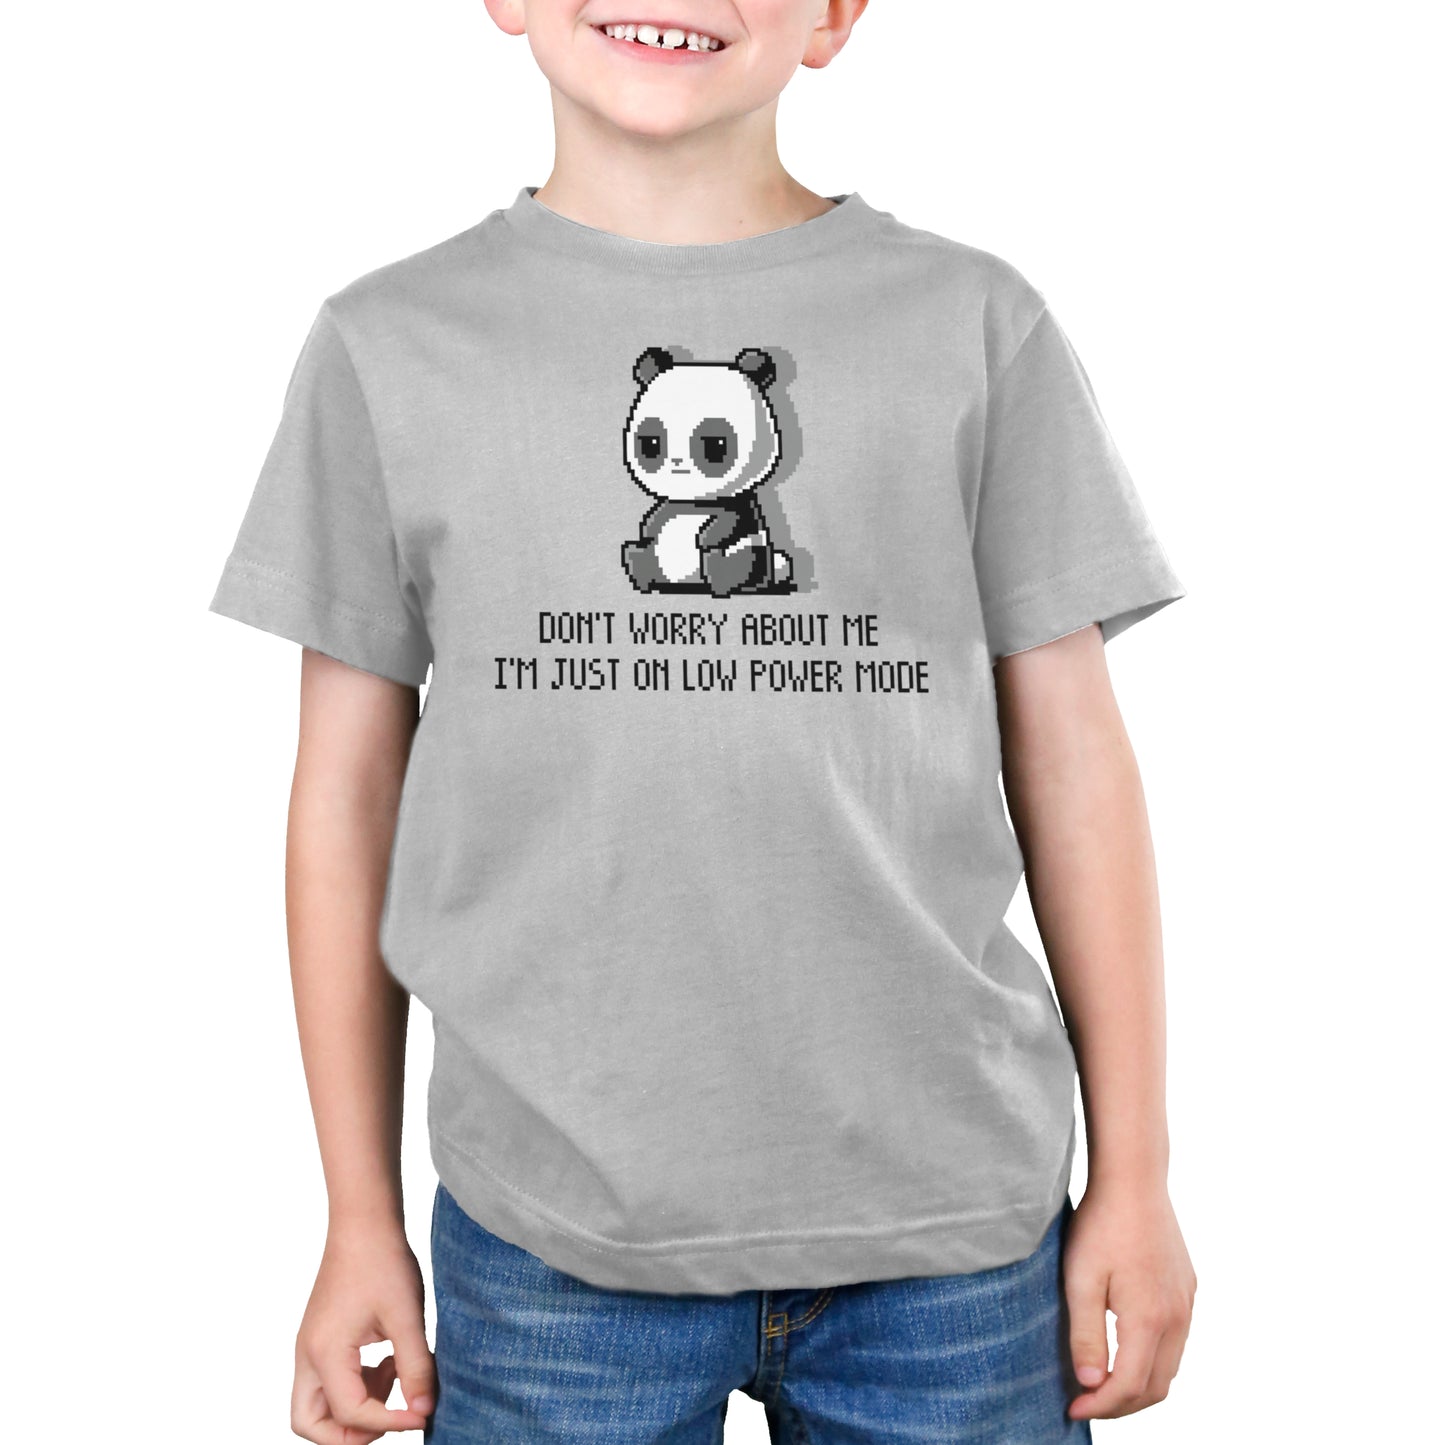 A child wearing a super soft ringspun cotton T-shirt with a cartoon panda and the text “Don't worry about me, I'm just on low power mode.” from the Low Power Mode collection by monsterdigital.